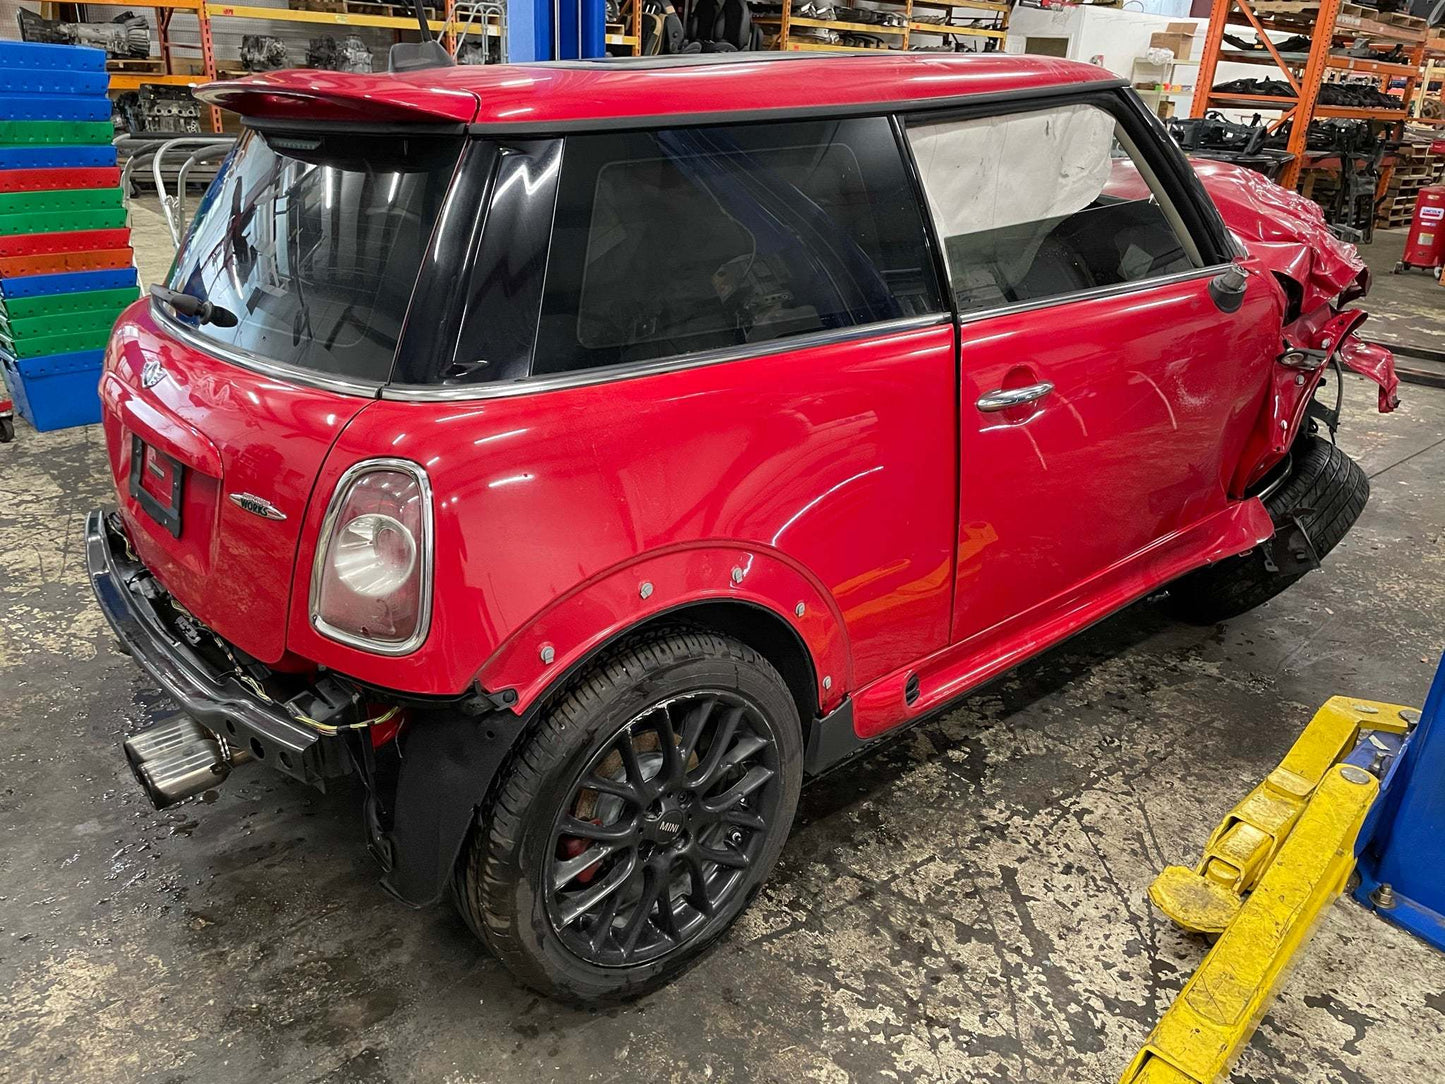 2012 MINI Cooper Hatchback S with JCW Package, New Parts Car (May 2021) Stk # 236